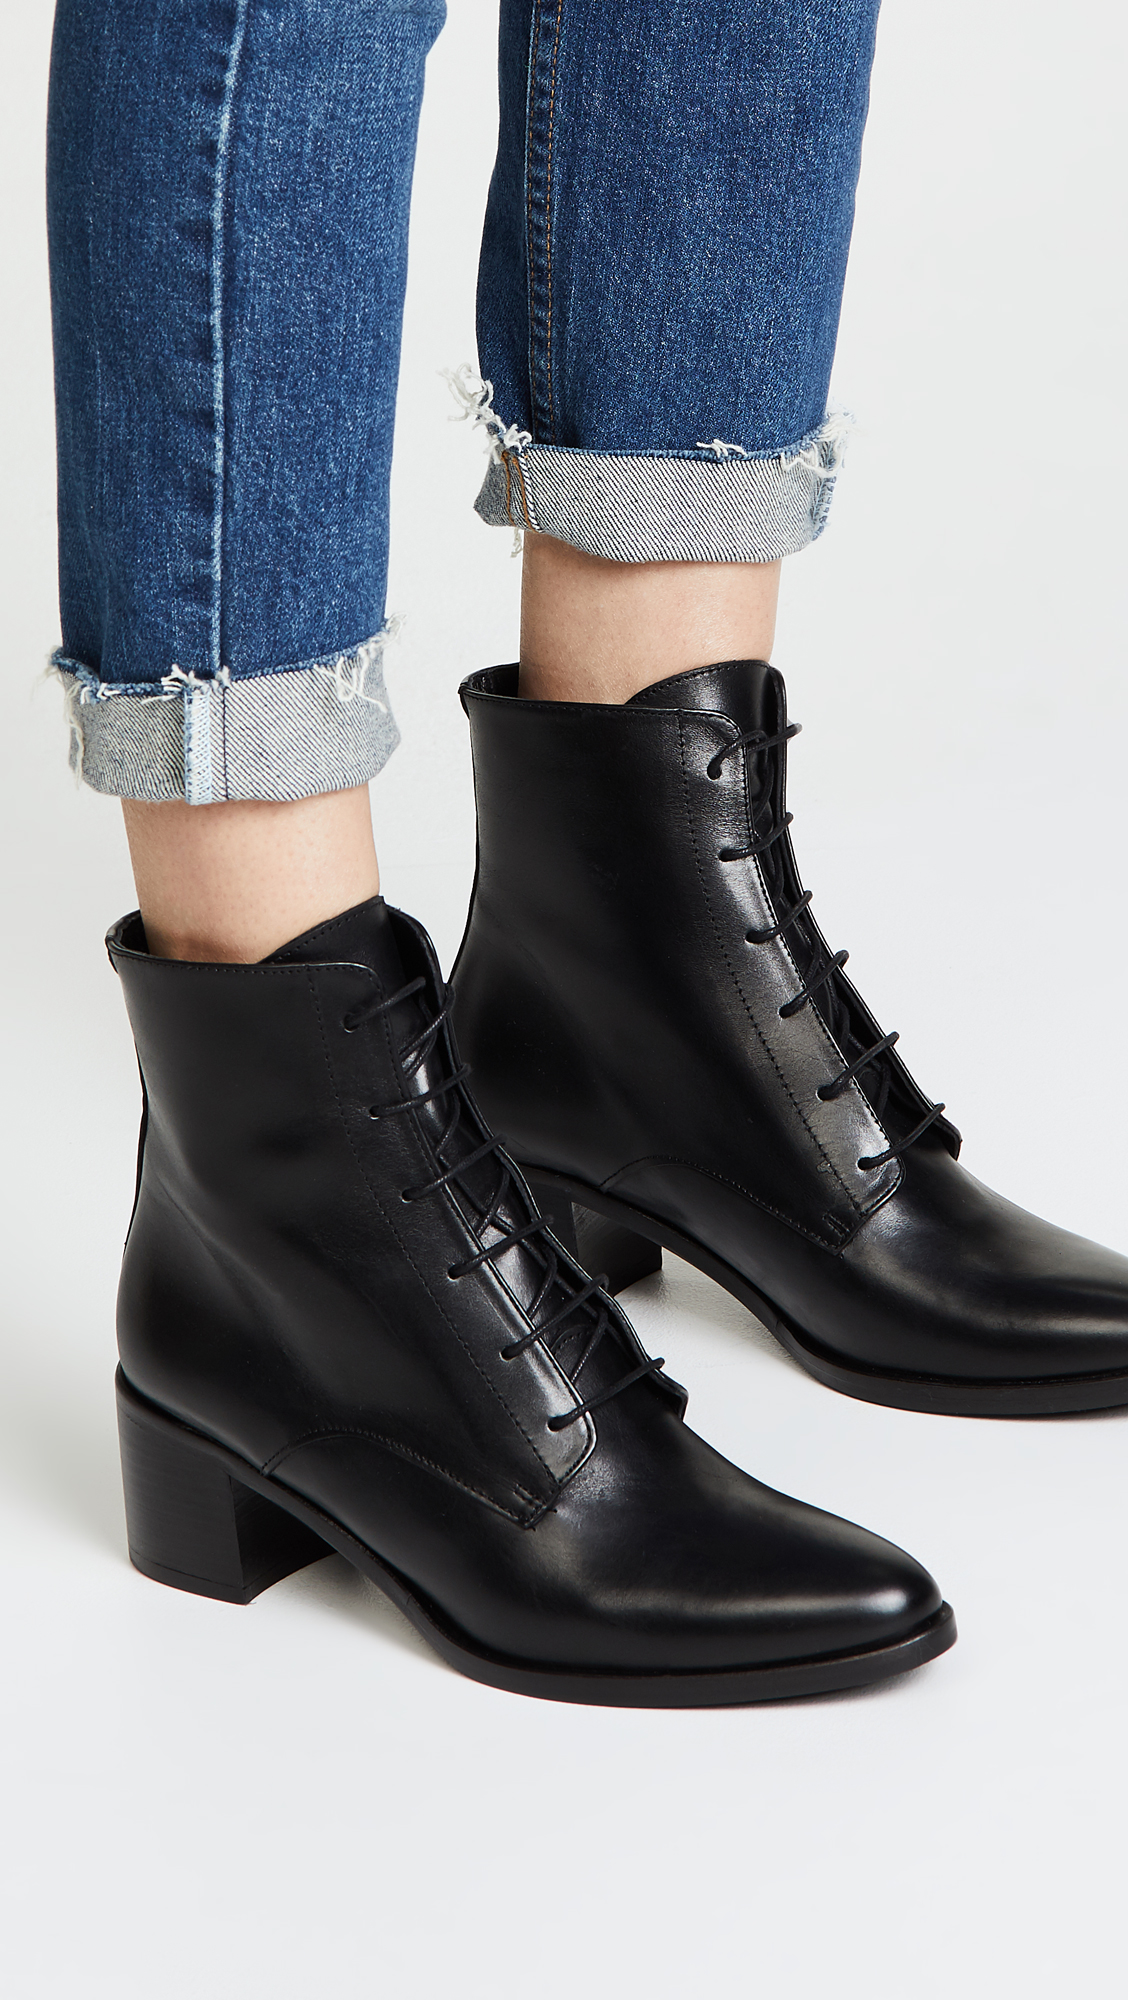 Freda Salvador The Ace Lace Up Booties 